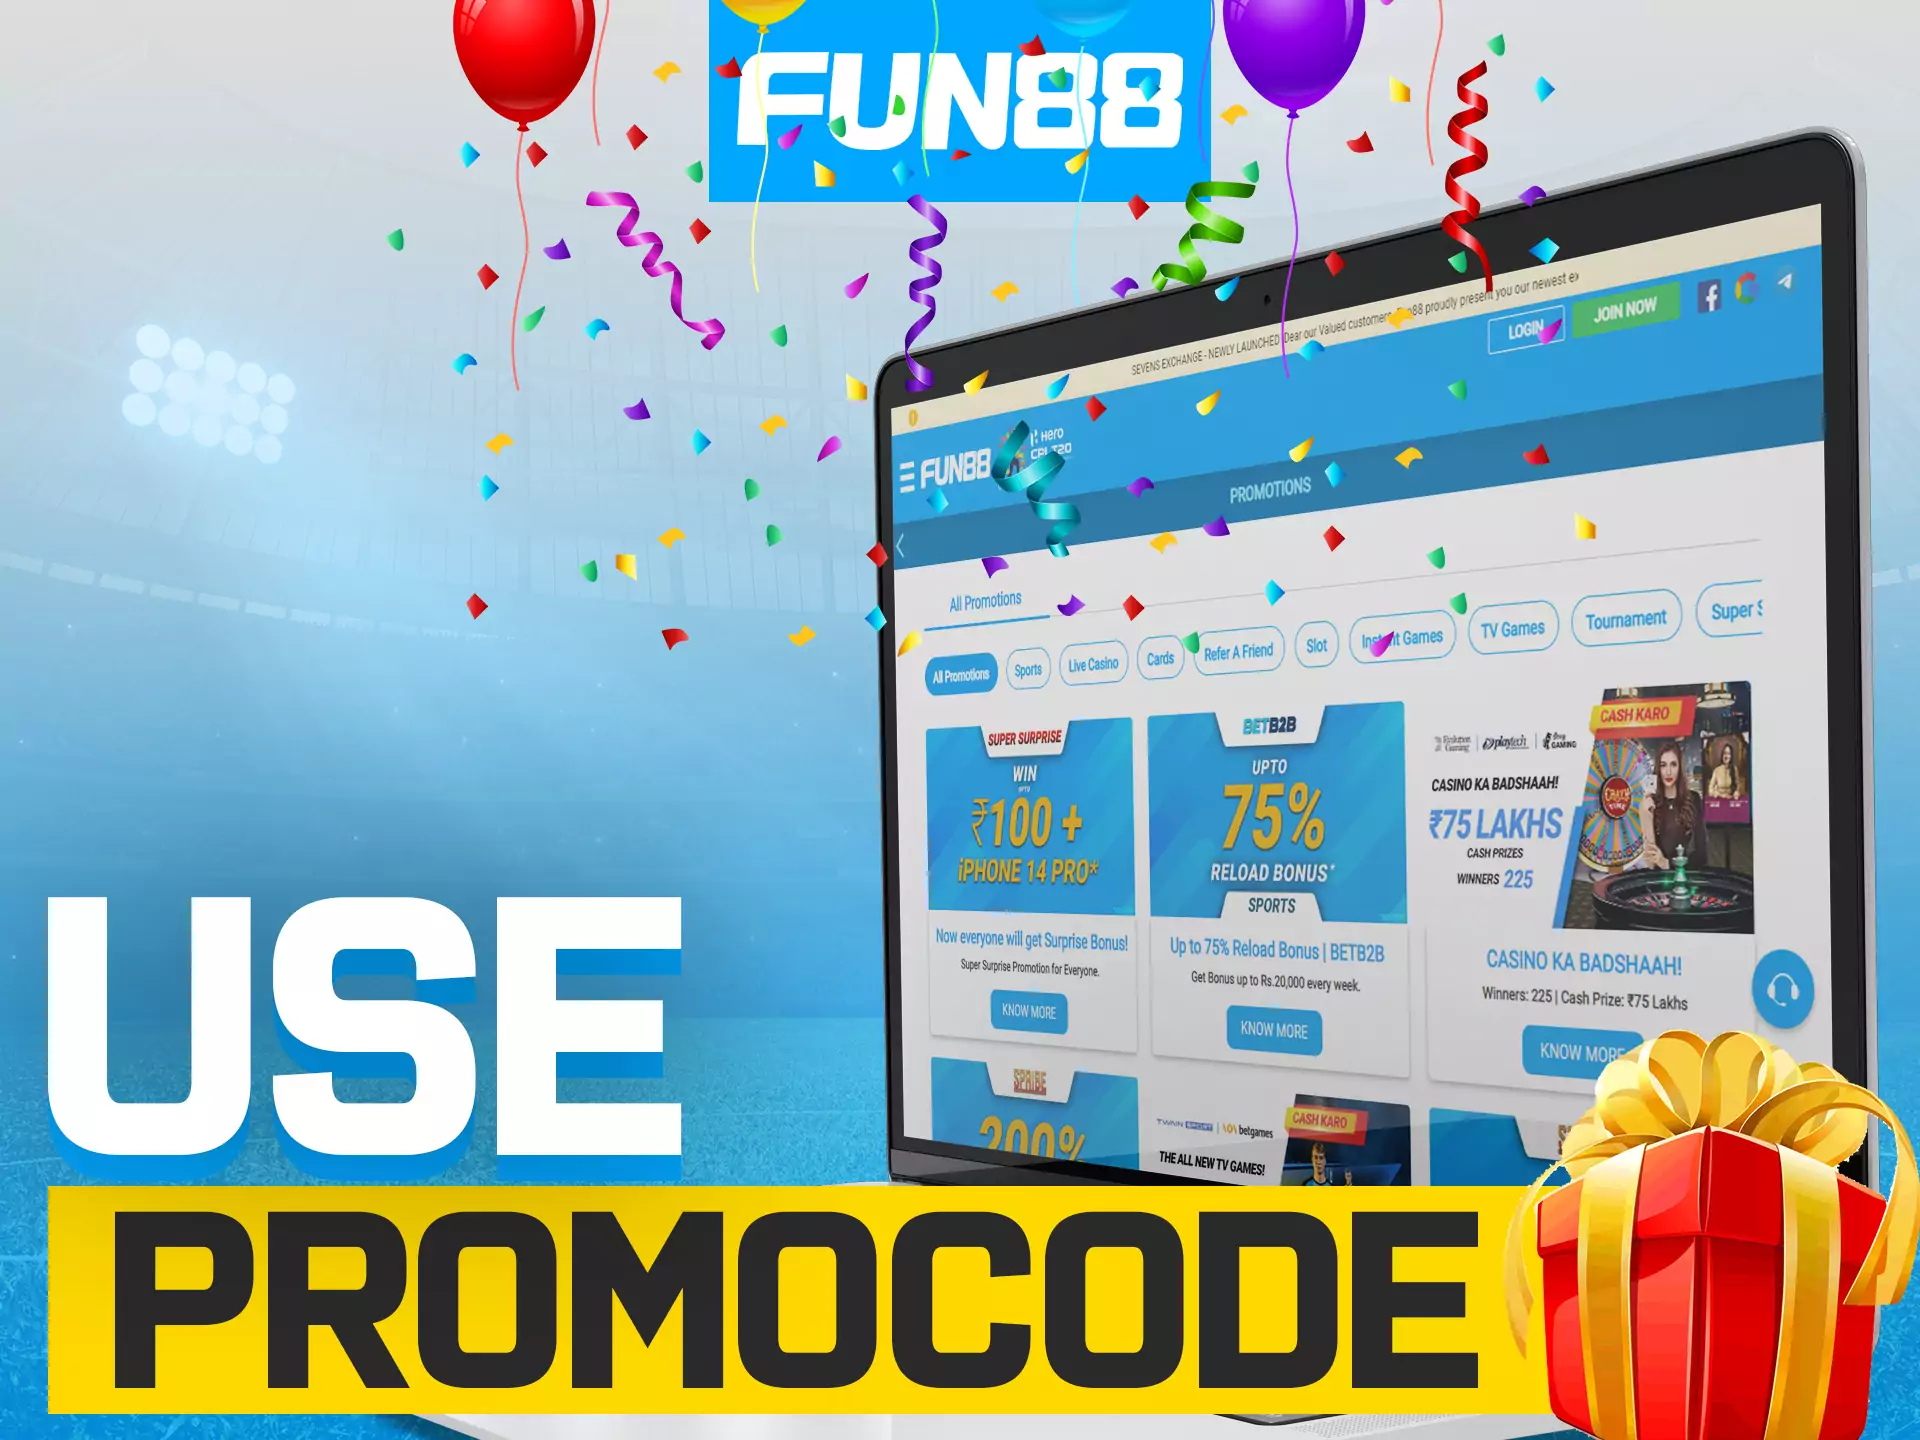 Use the special promo code Fun88 to get more benefits.